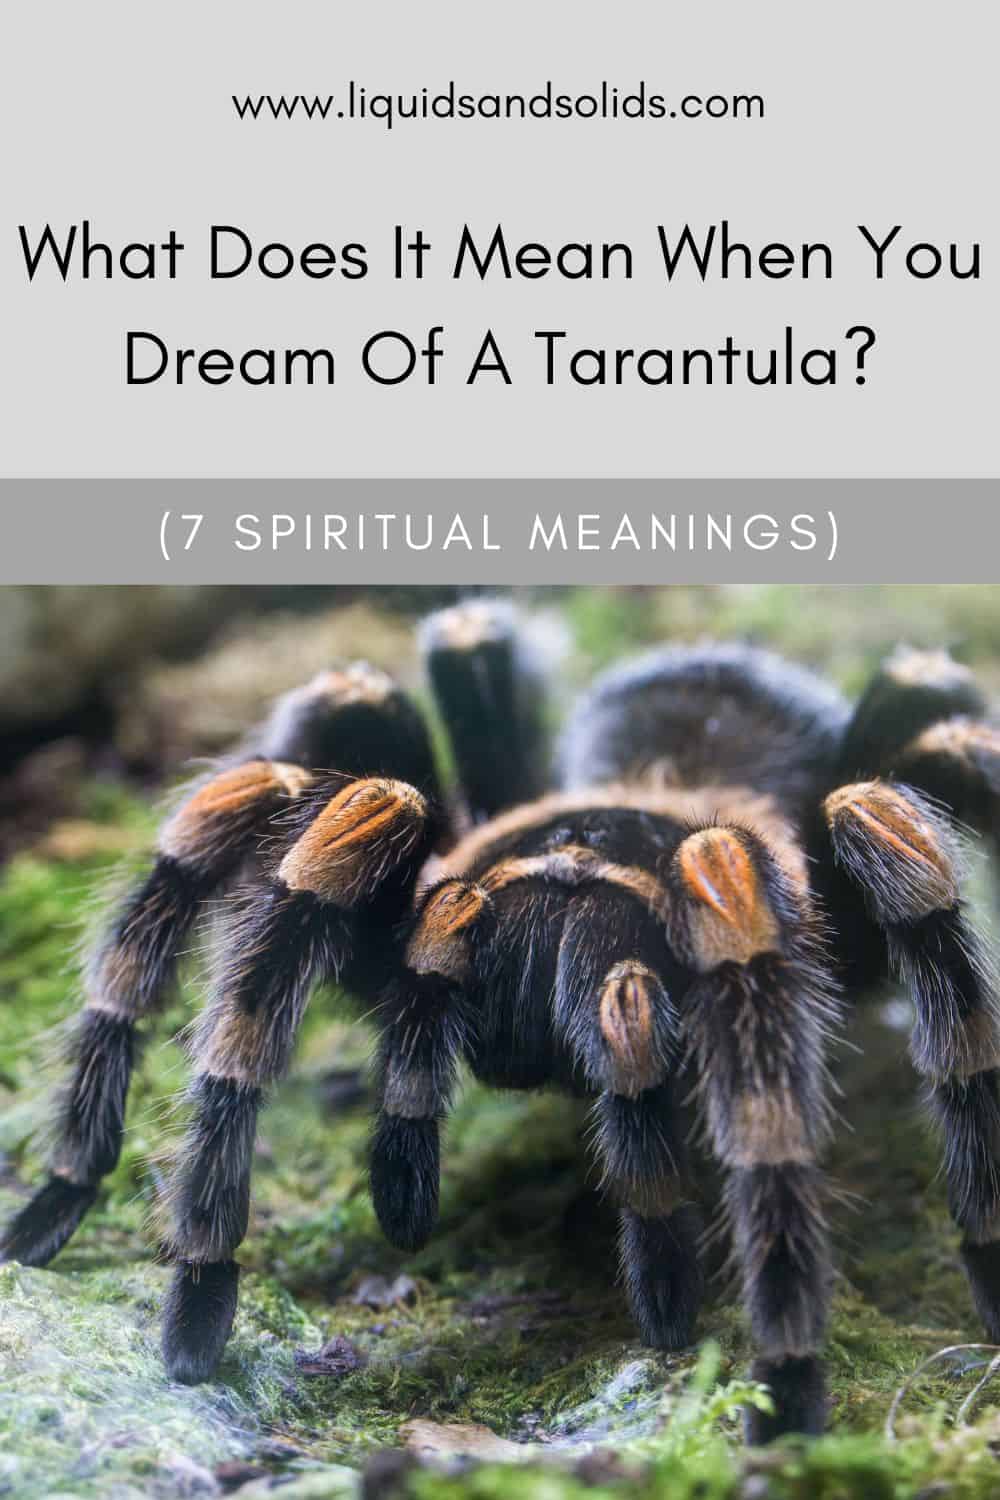 What Does It Mean When You Dream Of A Tarantula? (7 Spiritual Meanings)